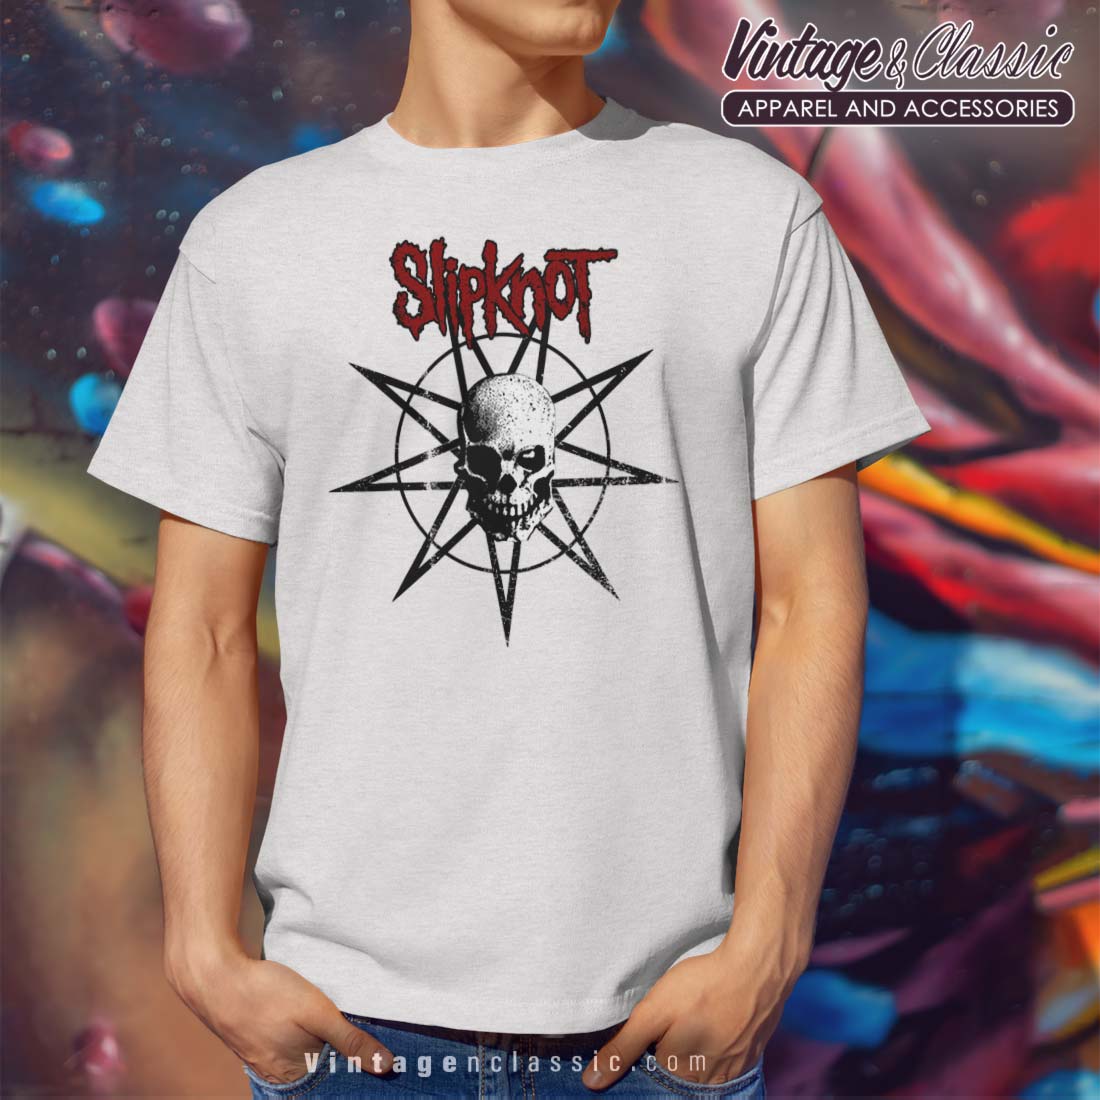 Slipknot - The Gray Chapter Star  Clothes and accessories for merchandise  fans